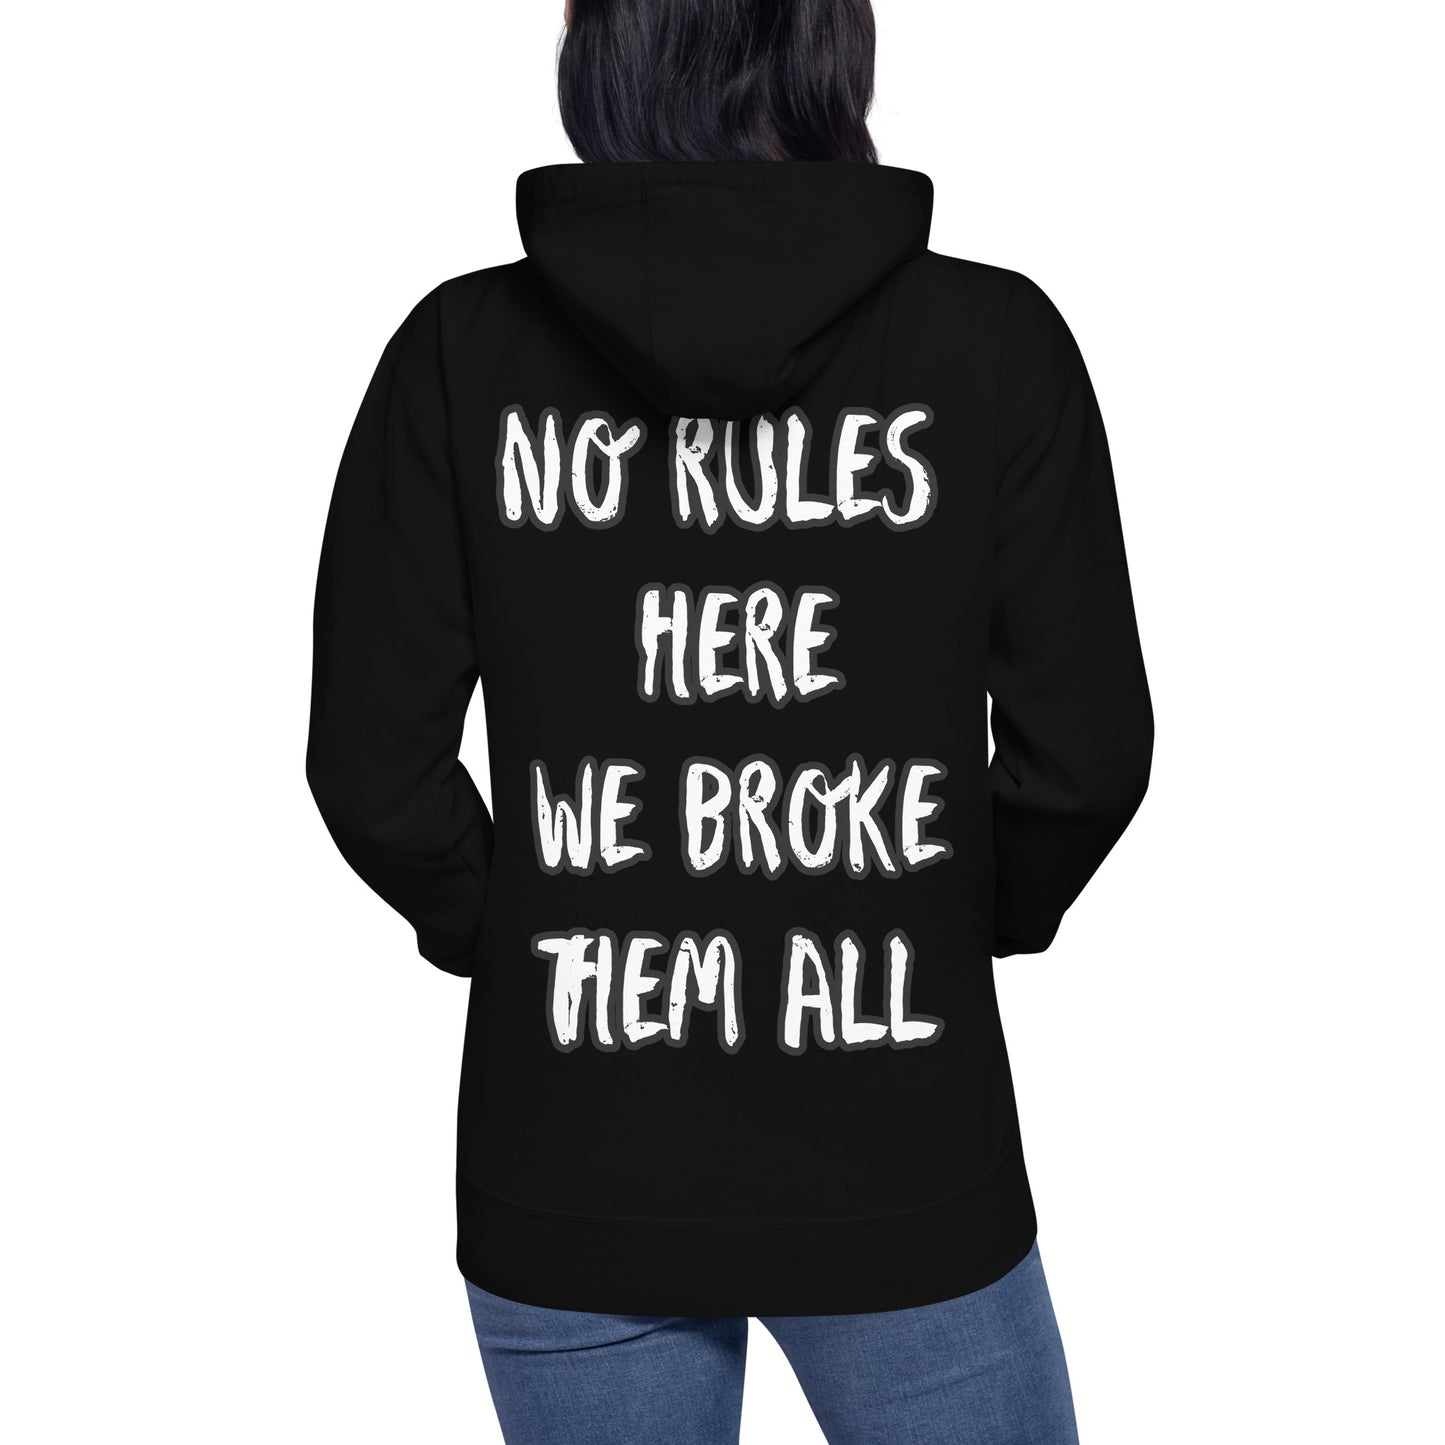 The Party Calls Unisex Hoodie